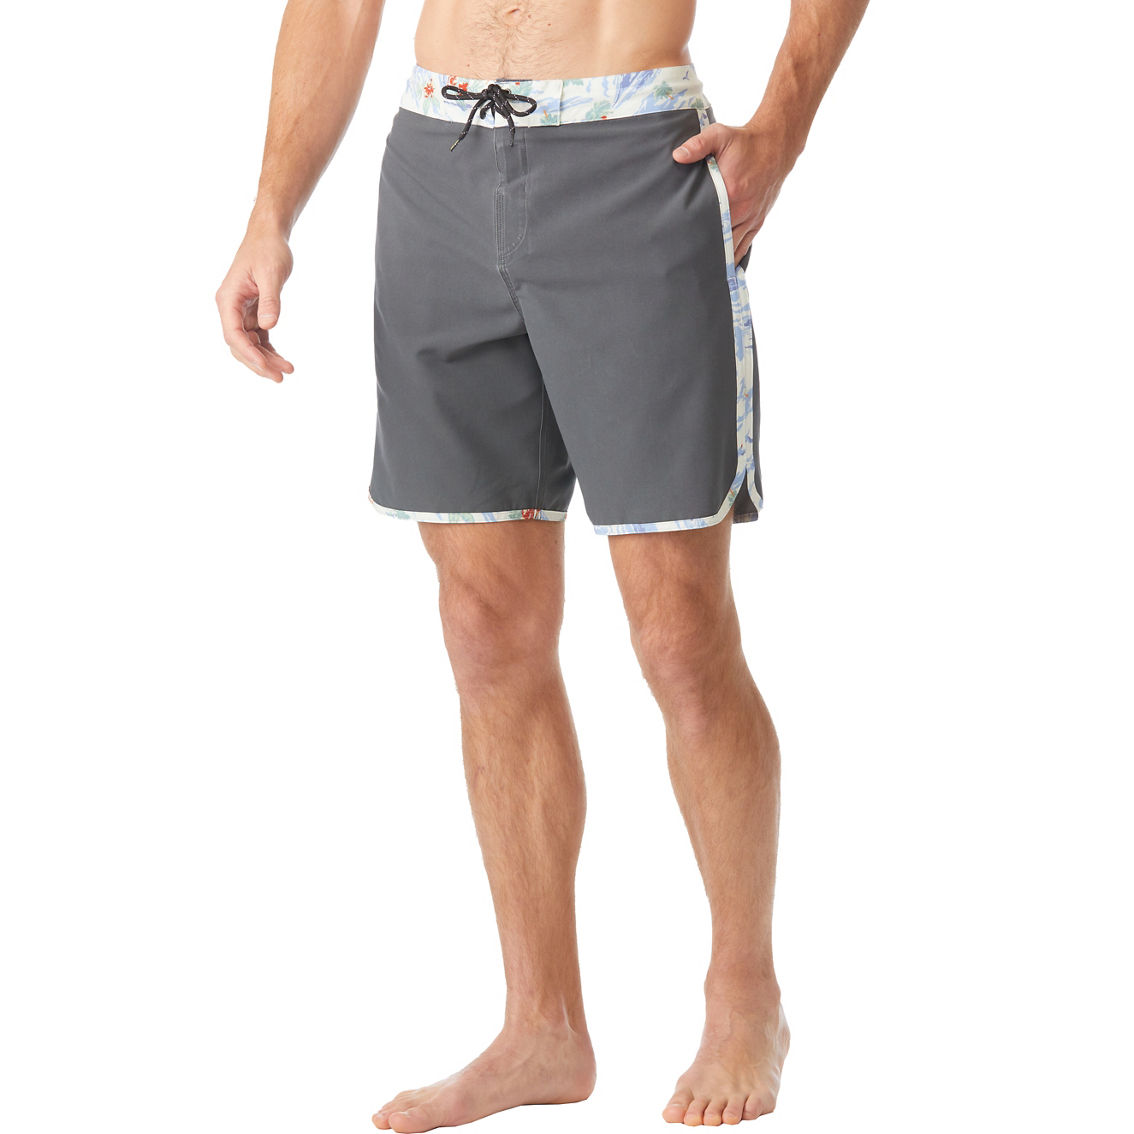 Body Glove Relaxed Fit Swim Scallop Board Shorts - Image 4 of 5